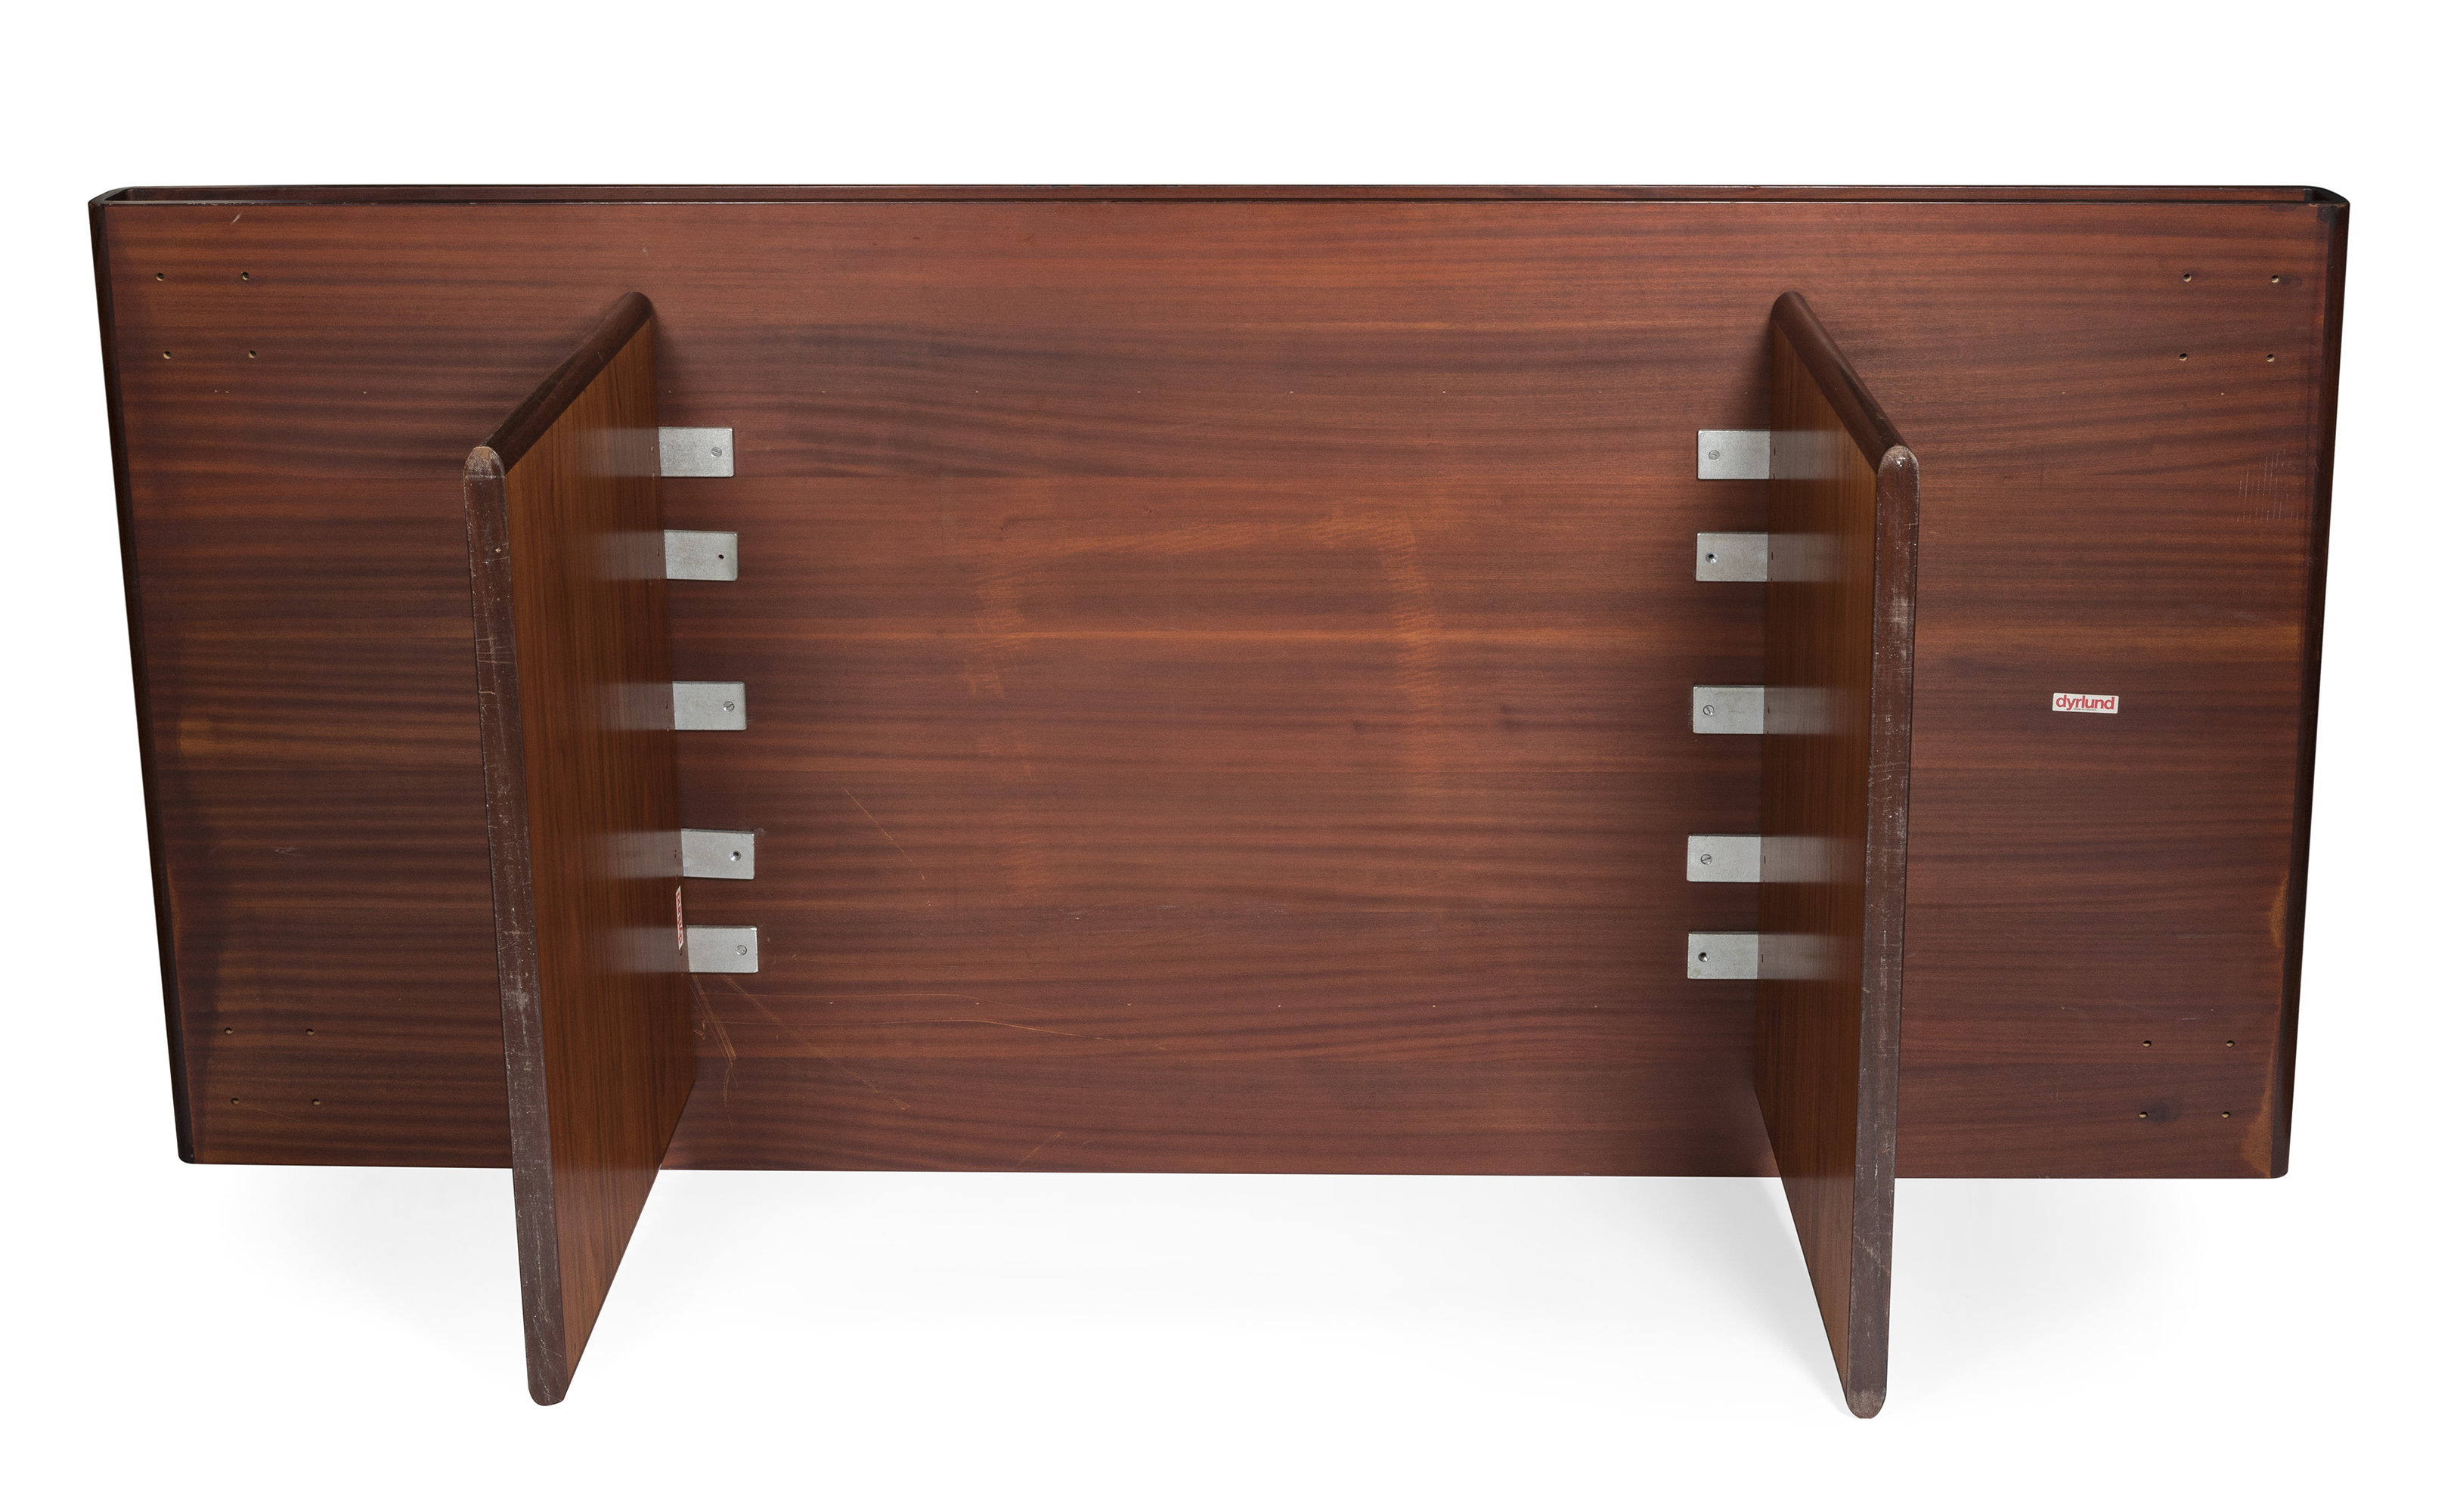 DYRLUND conference table. Denmark, mid-20th century. Rosewood. Measurements: 73 x 250 x 125 cm. - Image 3 of 5